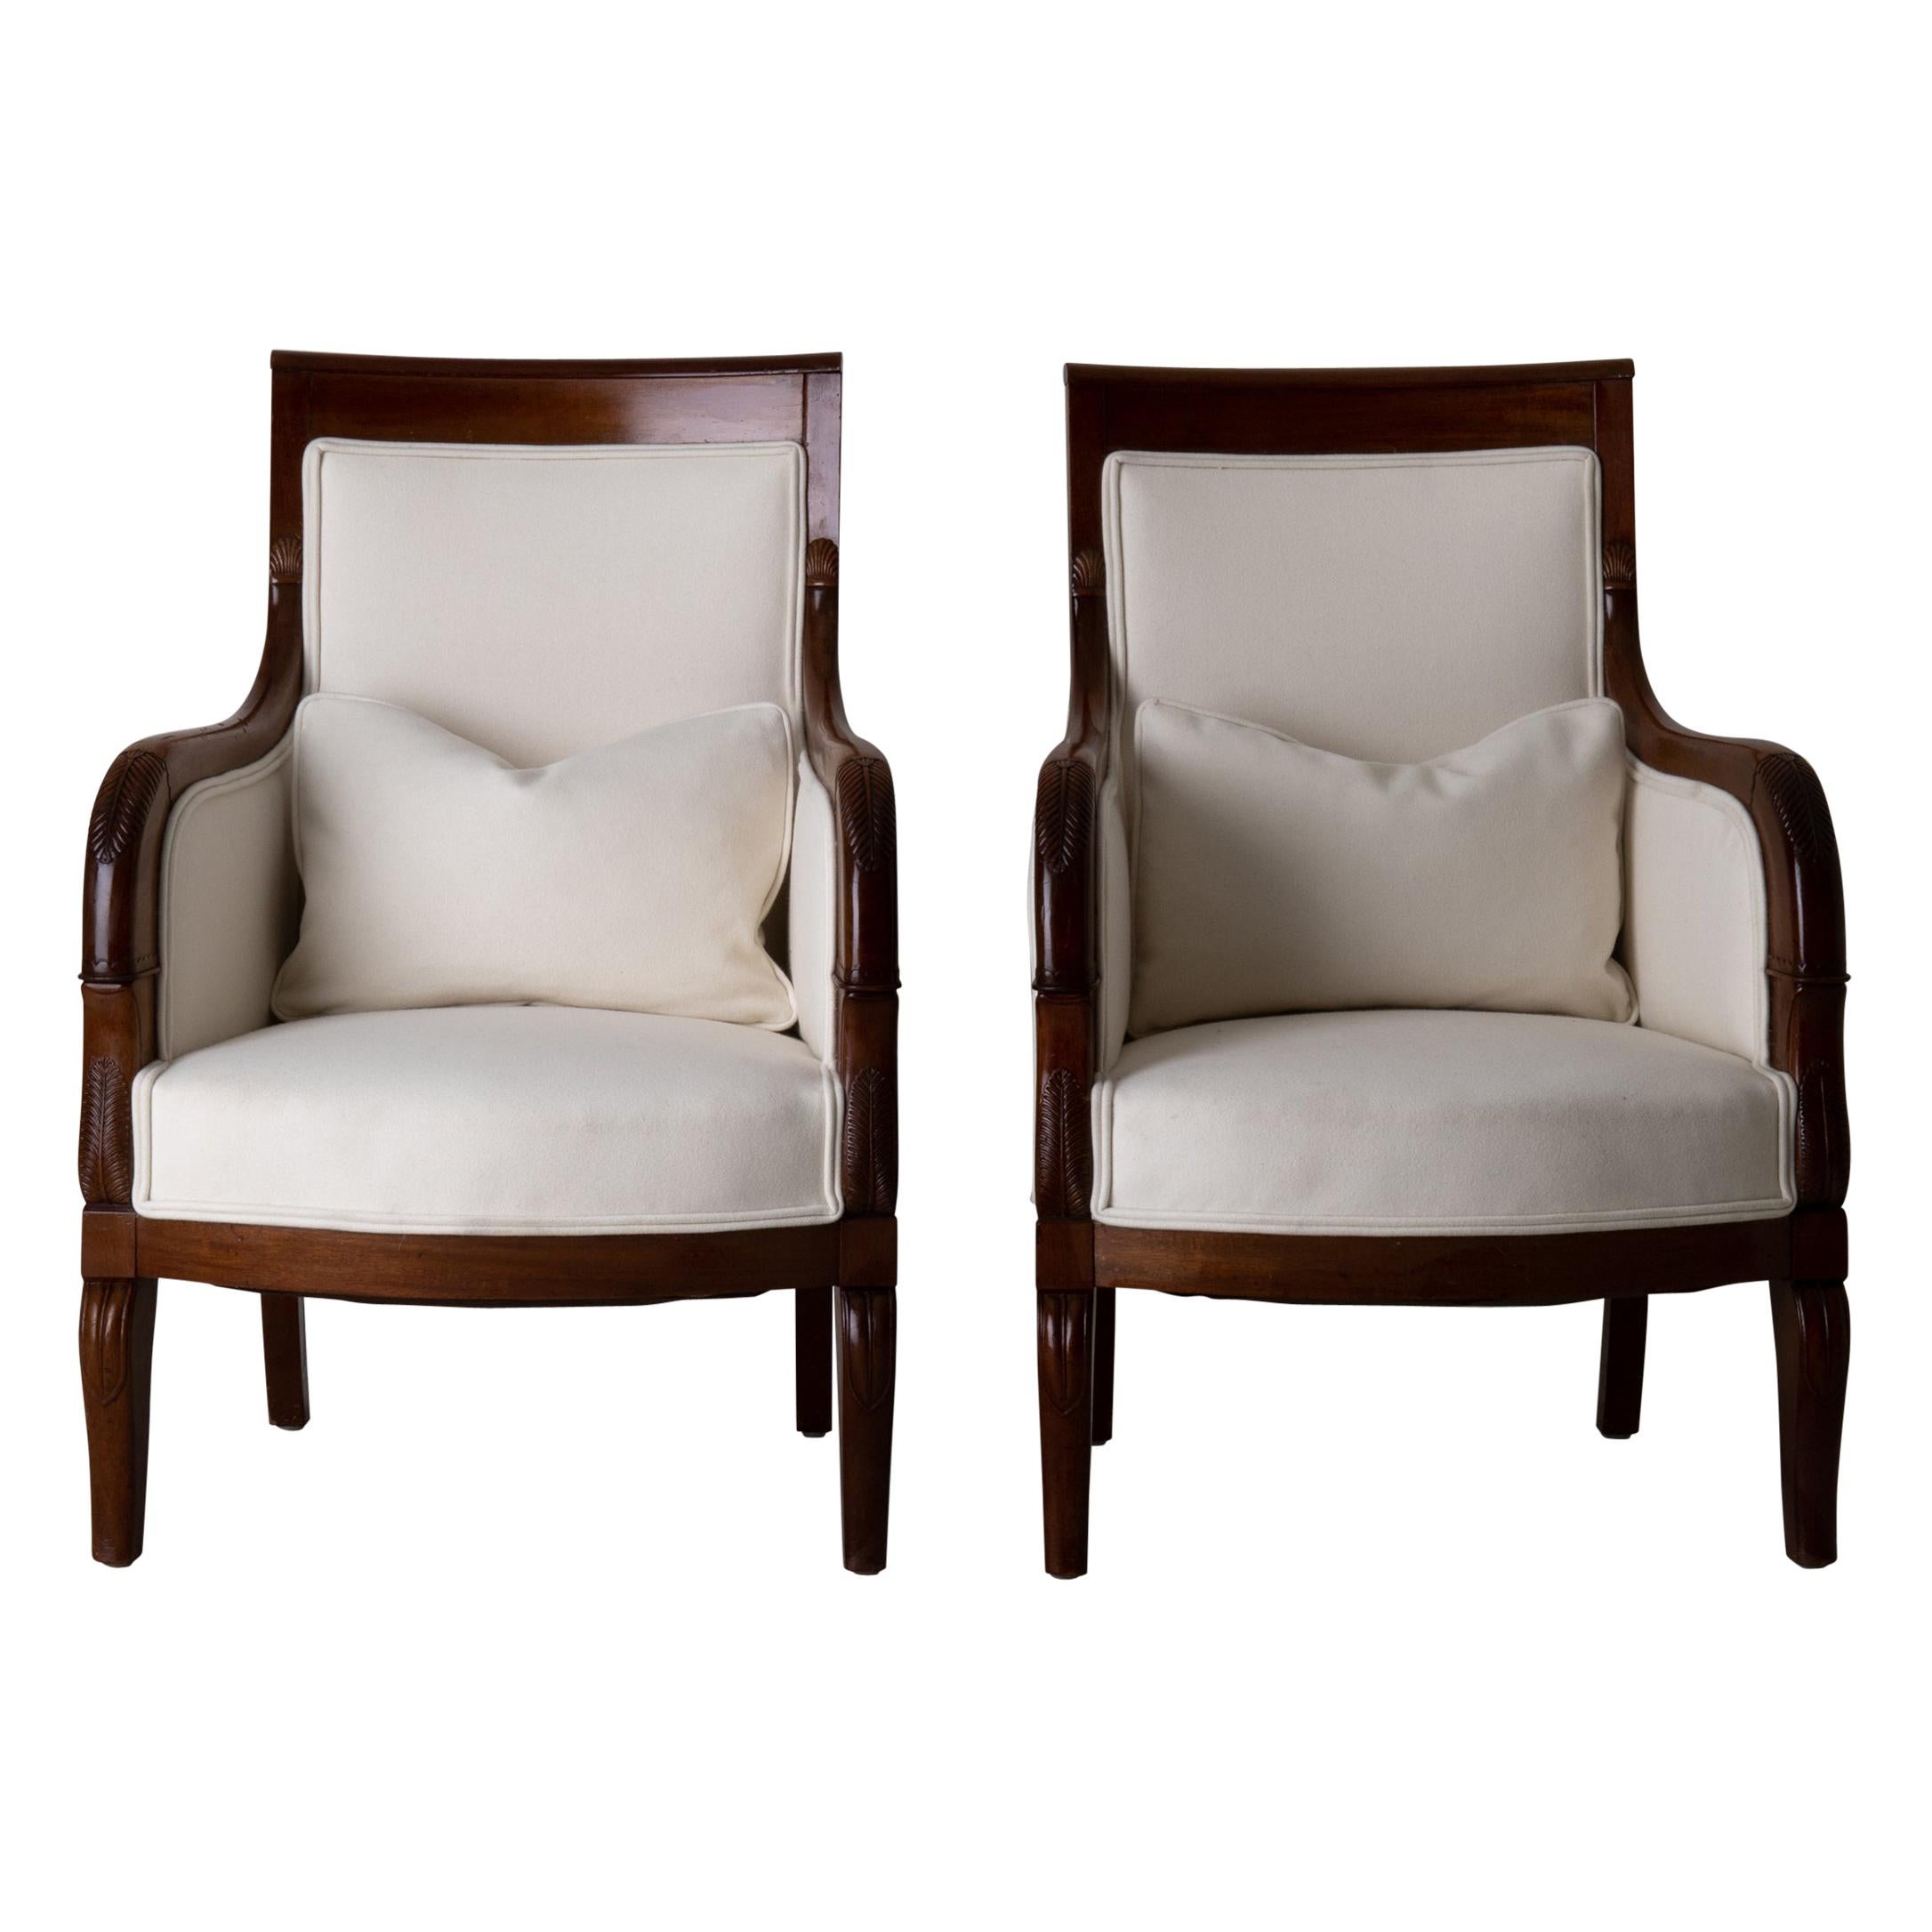 Chairs Pair of Bergeres 19th Century Directoire French Mahogany White France